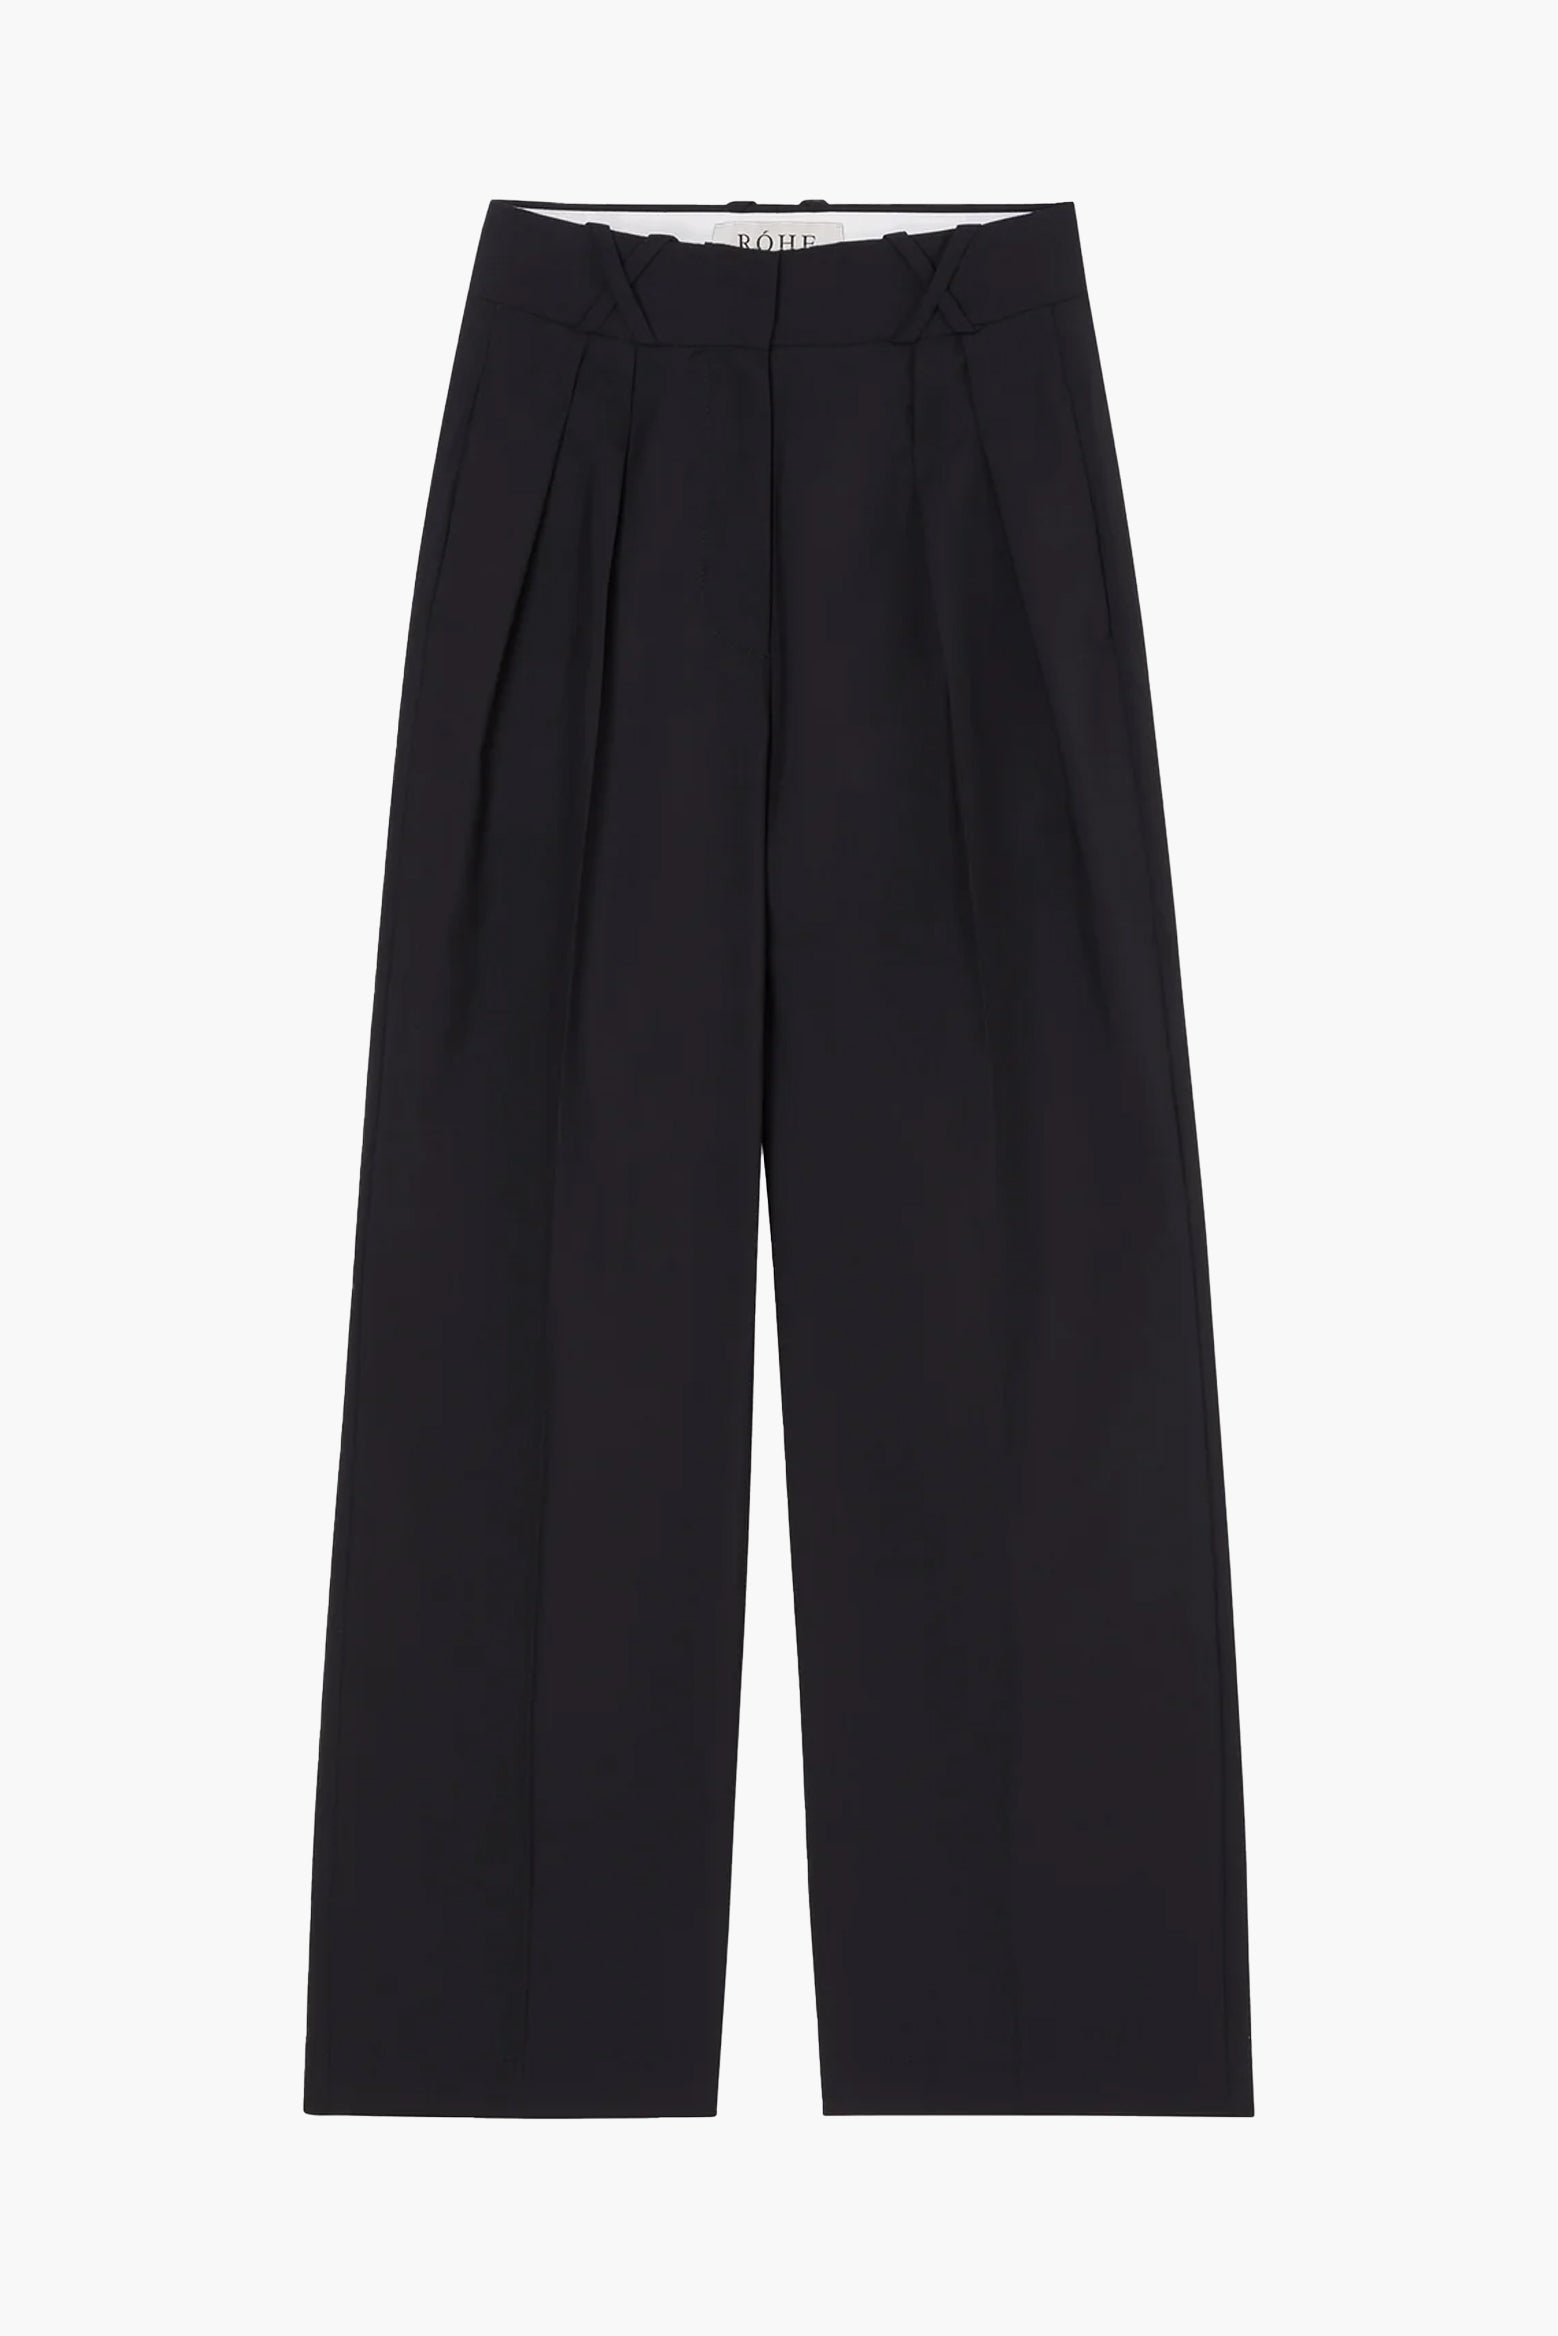 Rohe Wide Leg Tailored Trouser in Noir available at The New Trend Australia. 